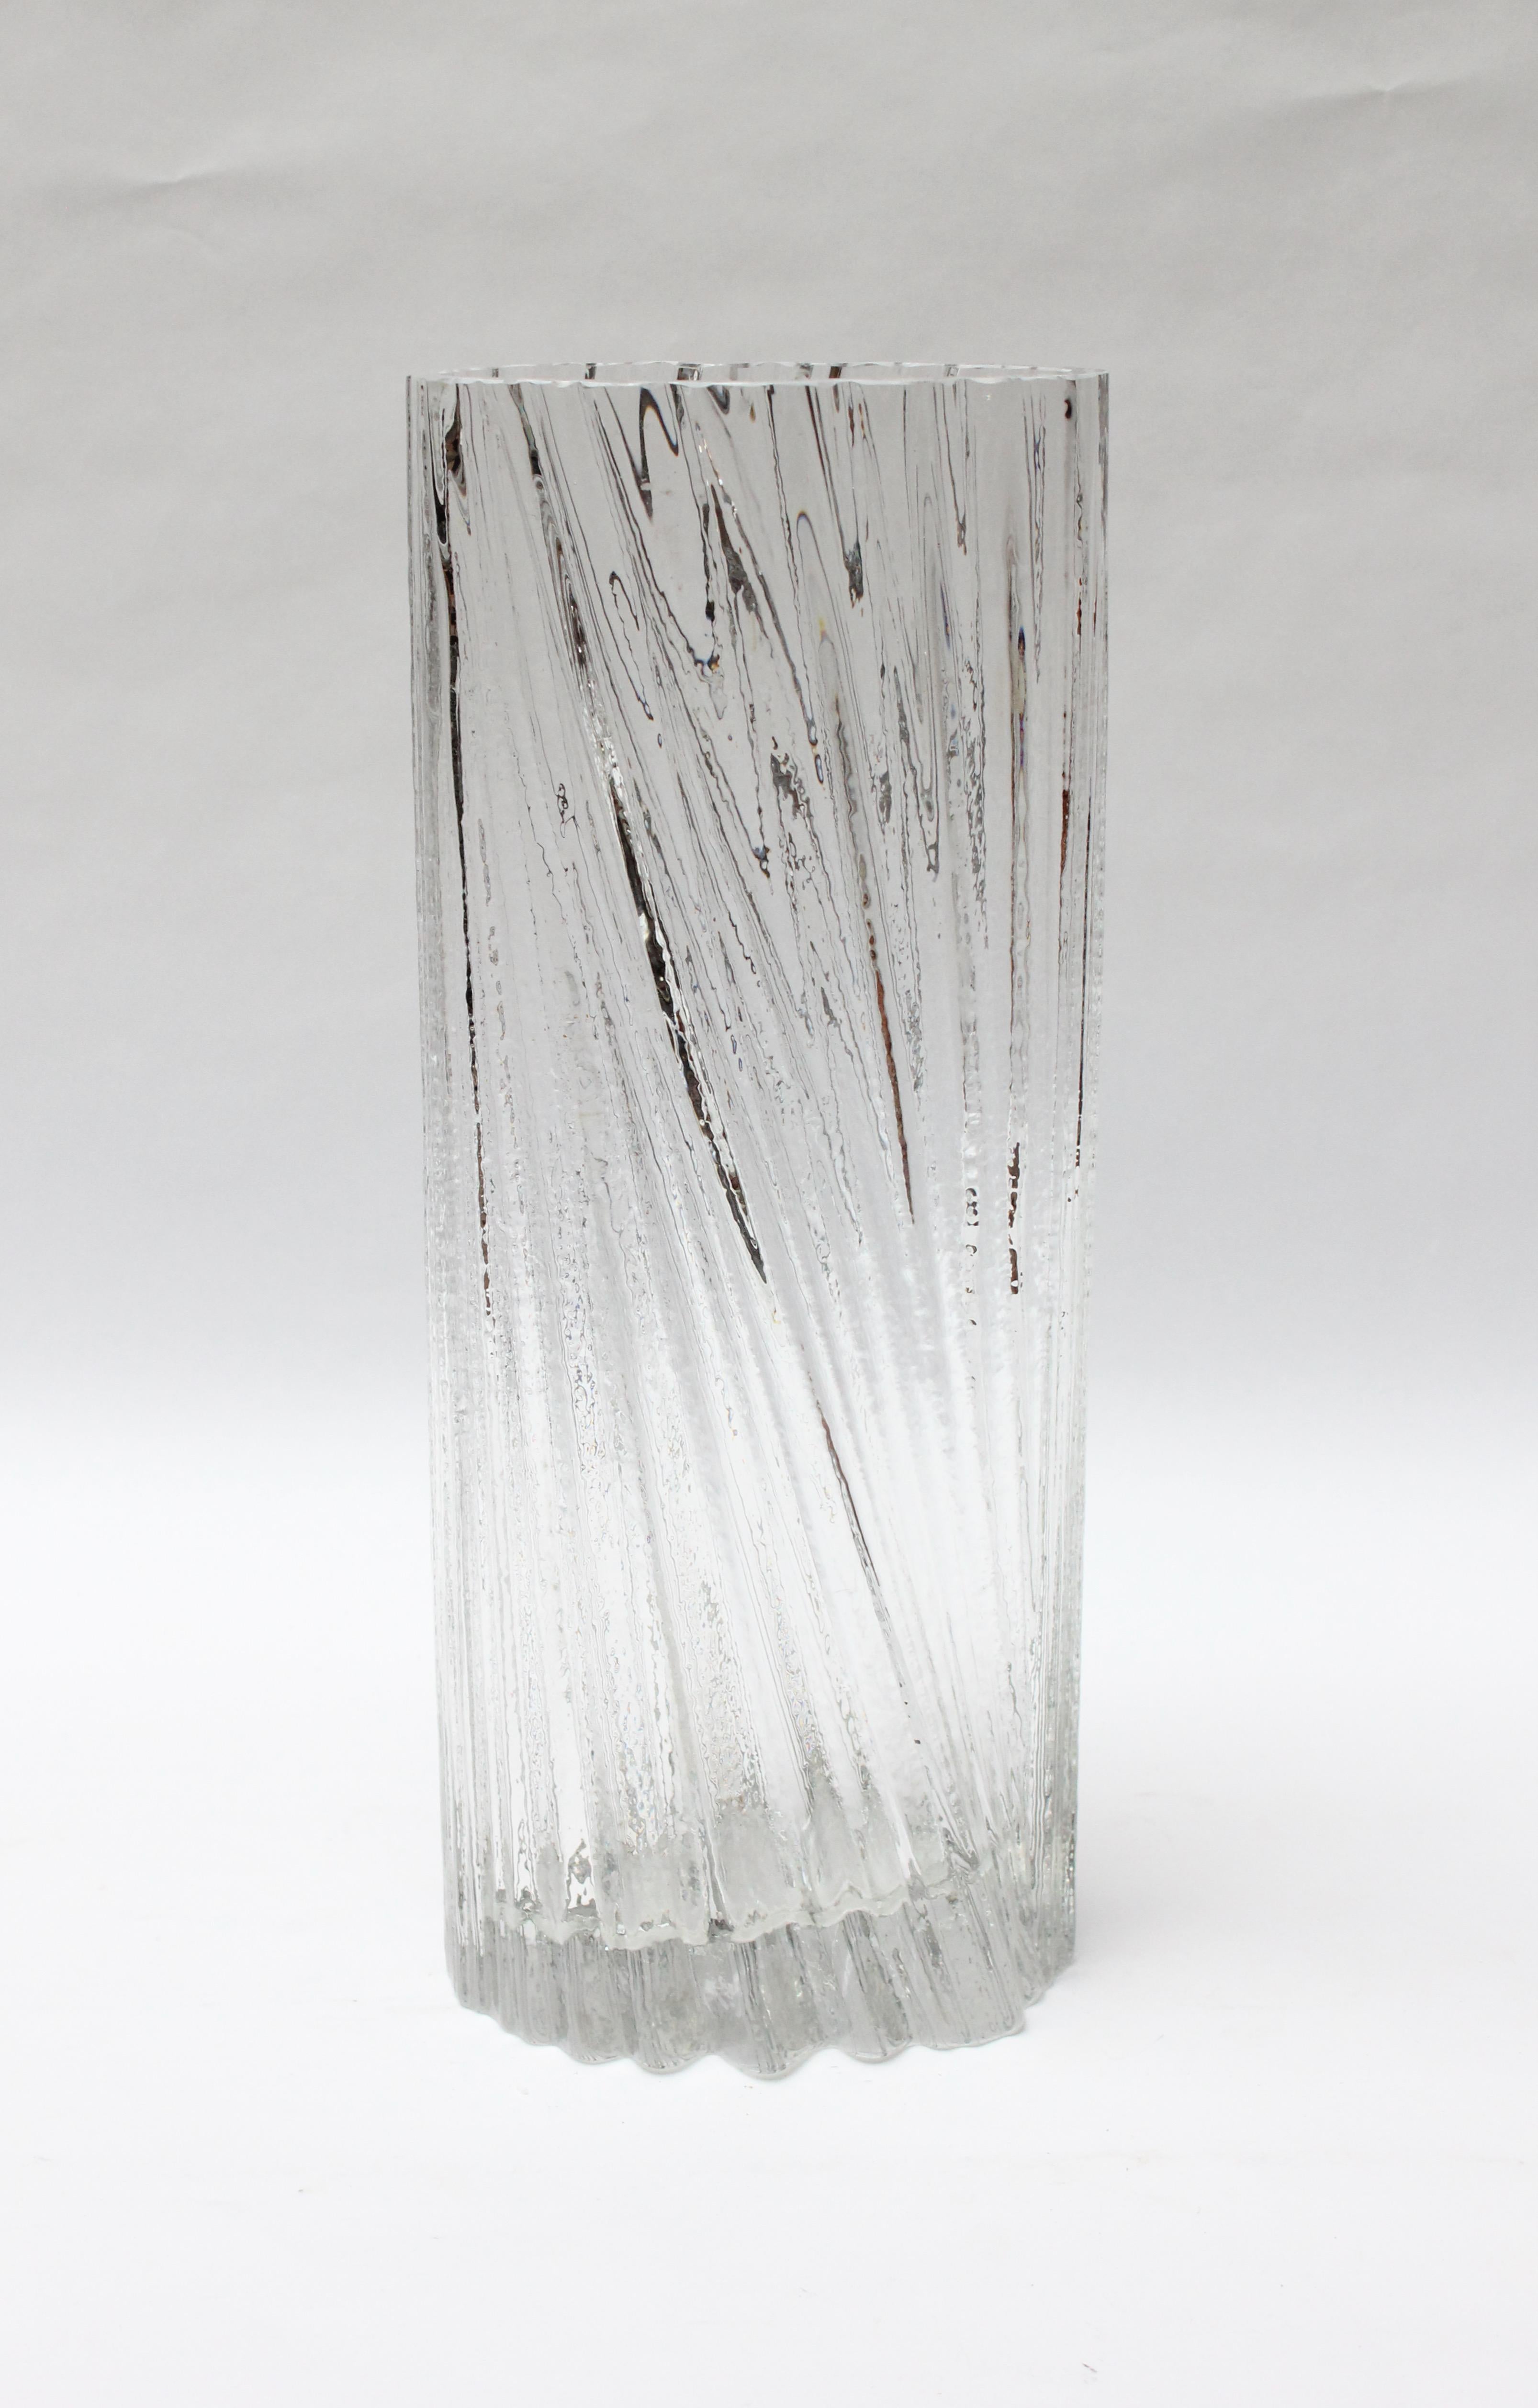 Impressive, statuesque glass vase by Finnish designer, Tapio Wirkkala, for Rosenthal Studio-Line of Germany. Composed of thick glass sculpted to look like ice.
Largest example manufactured (scarcely seen in this size), measuring: H: 18